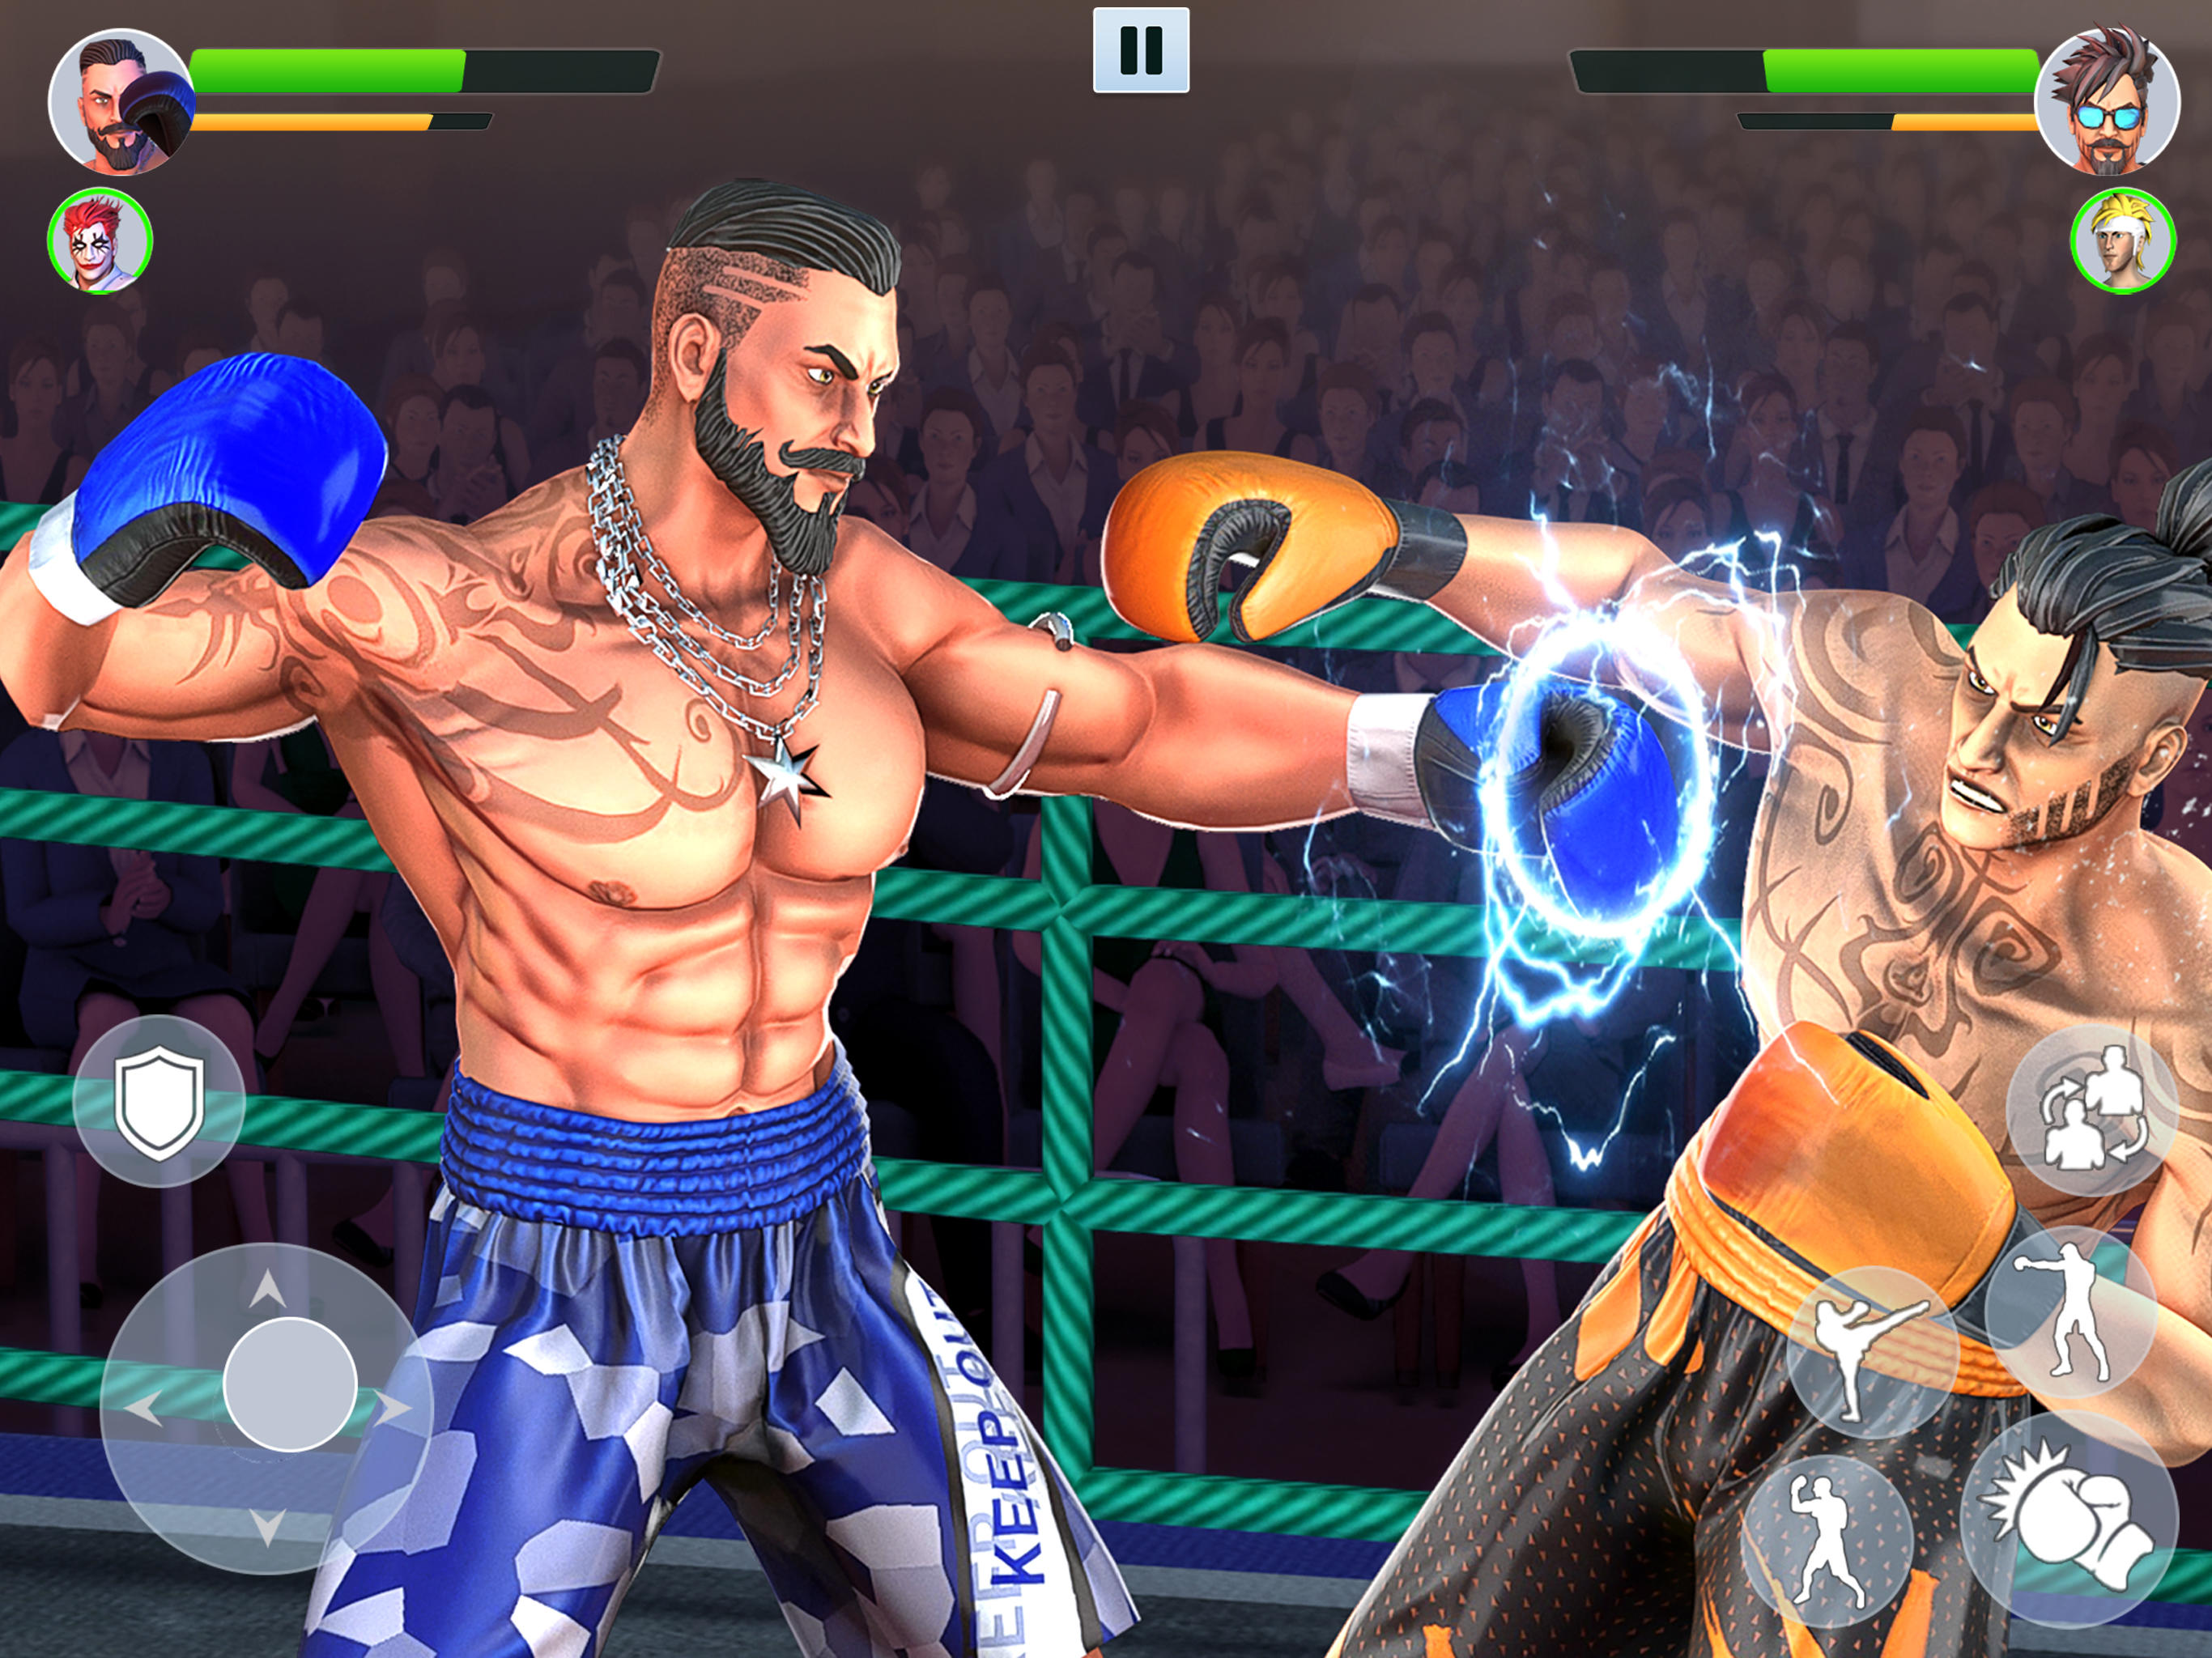 Tag Boxing Games: Punch Fightのキャプチャ